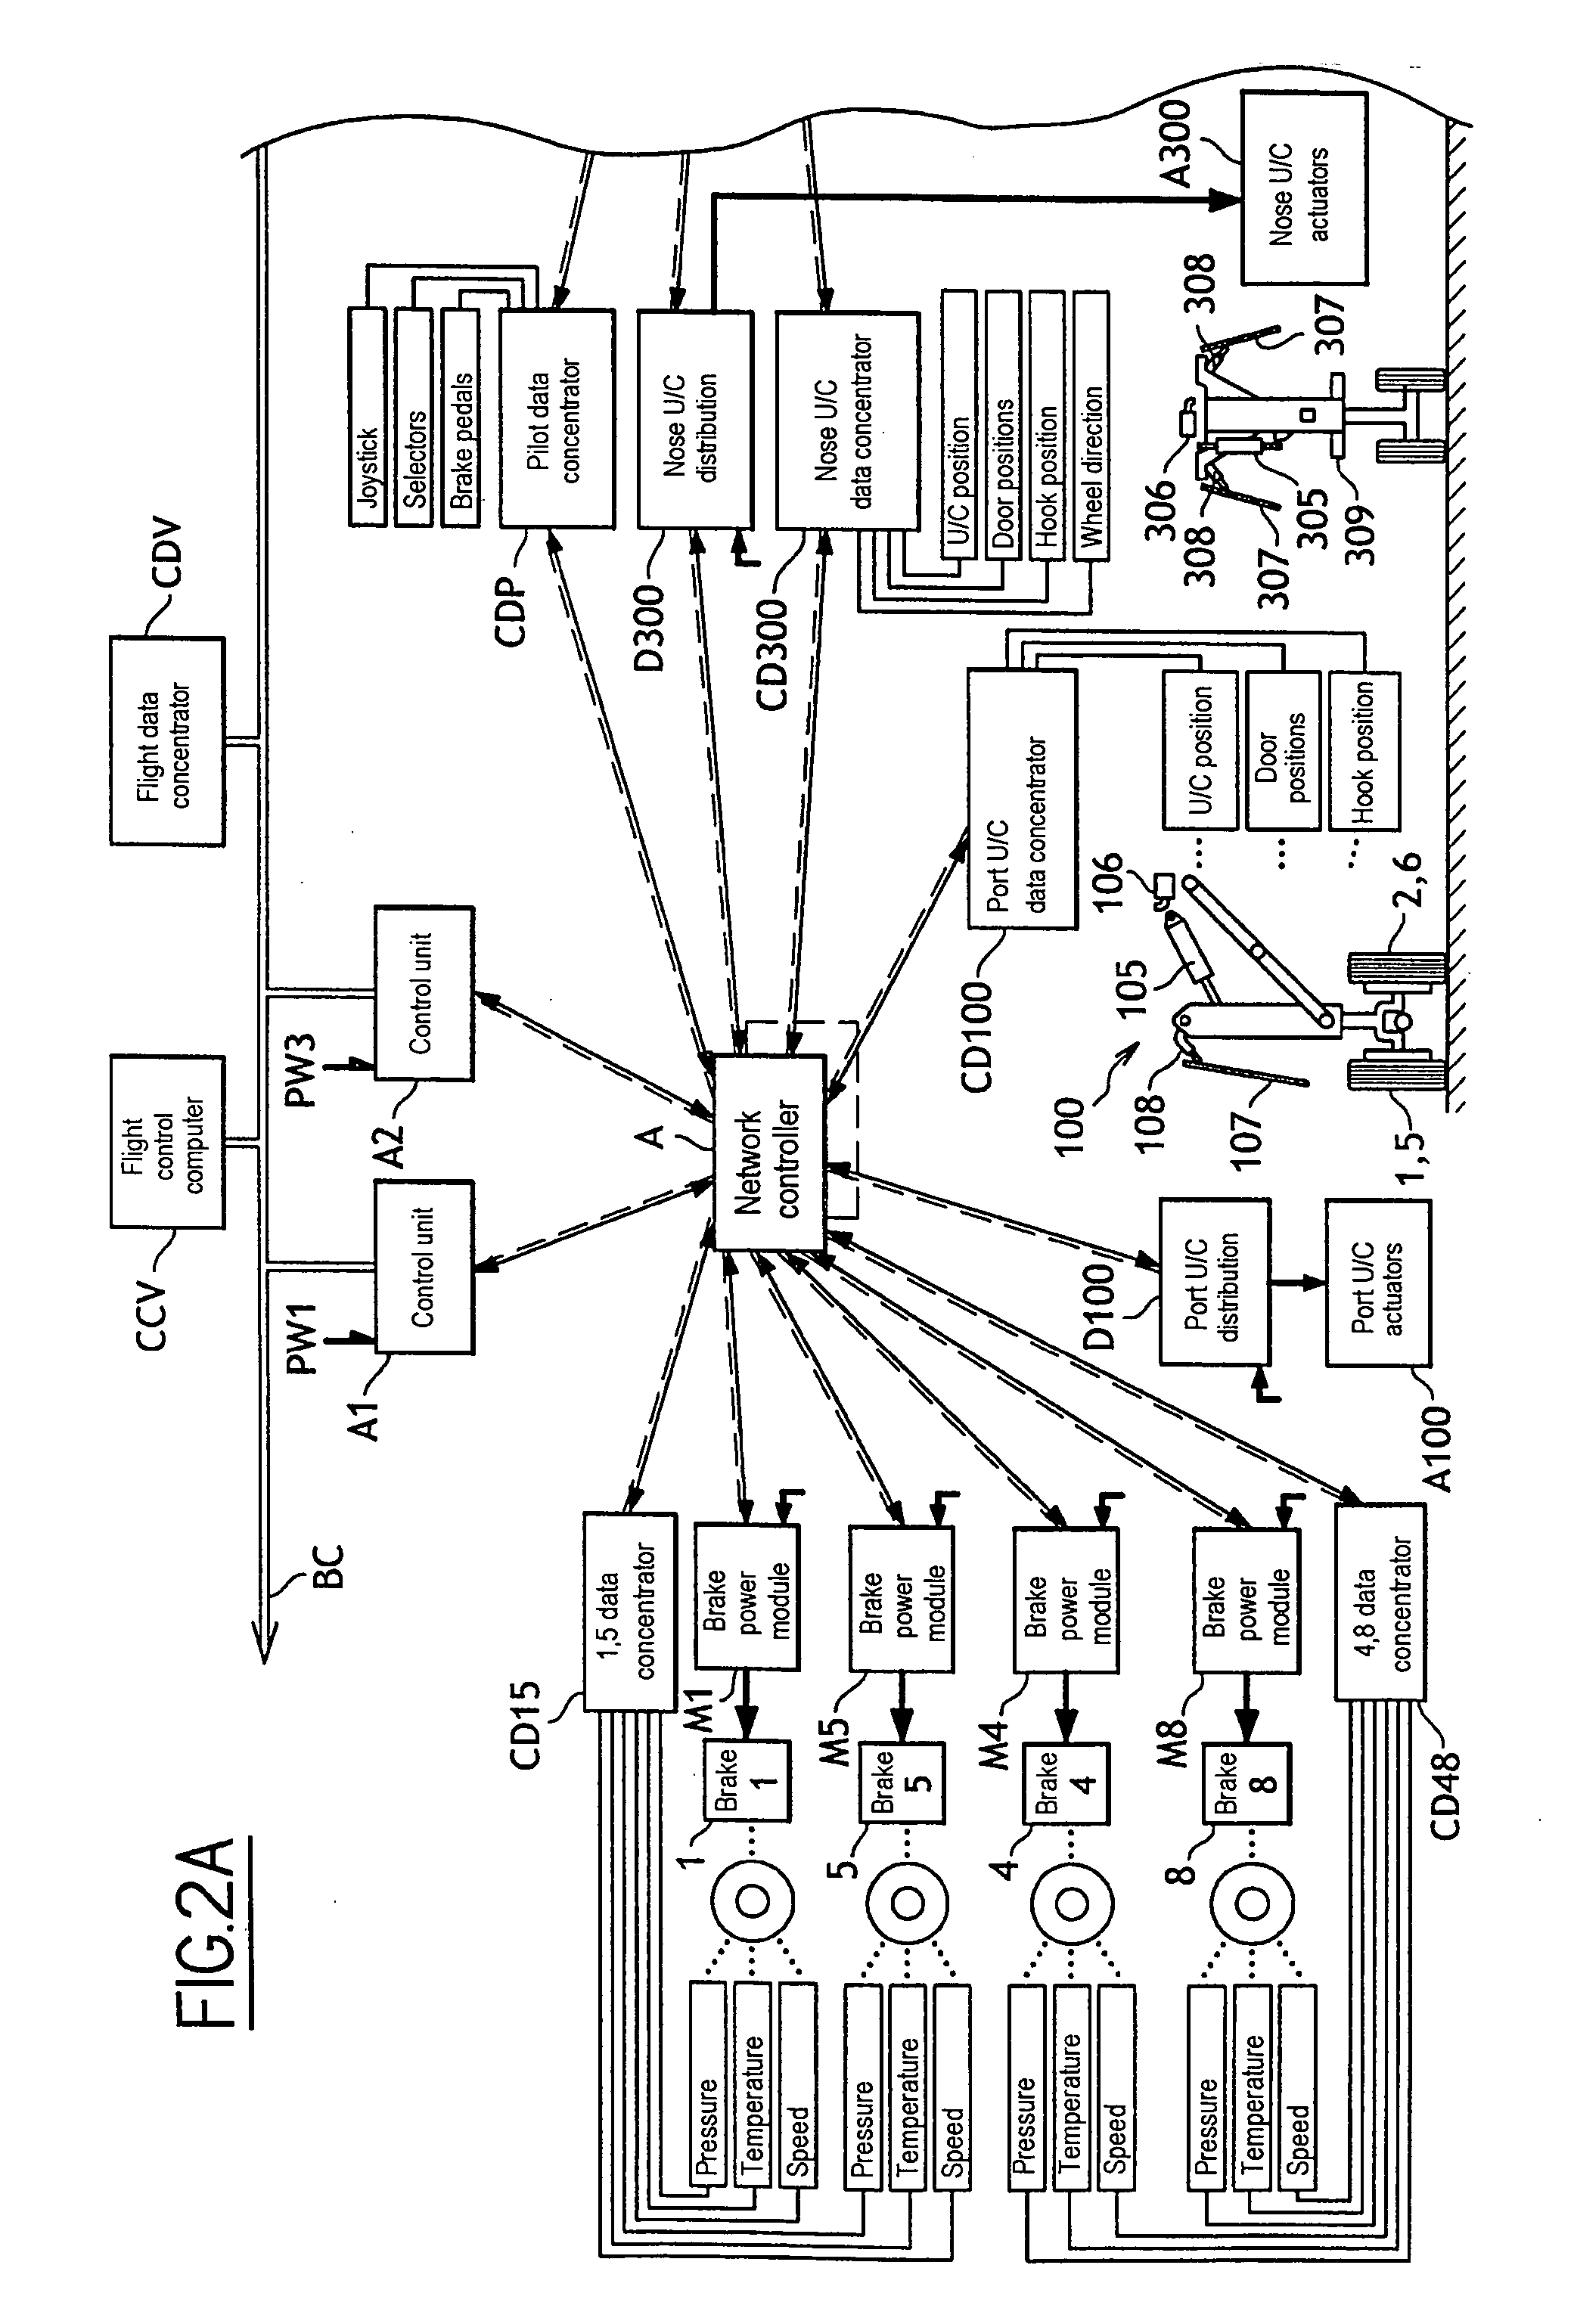 Distributed architecture for a system for managing aircraft landing gear